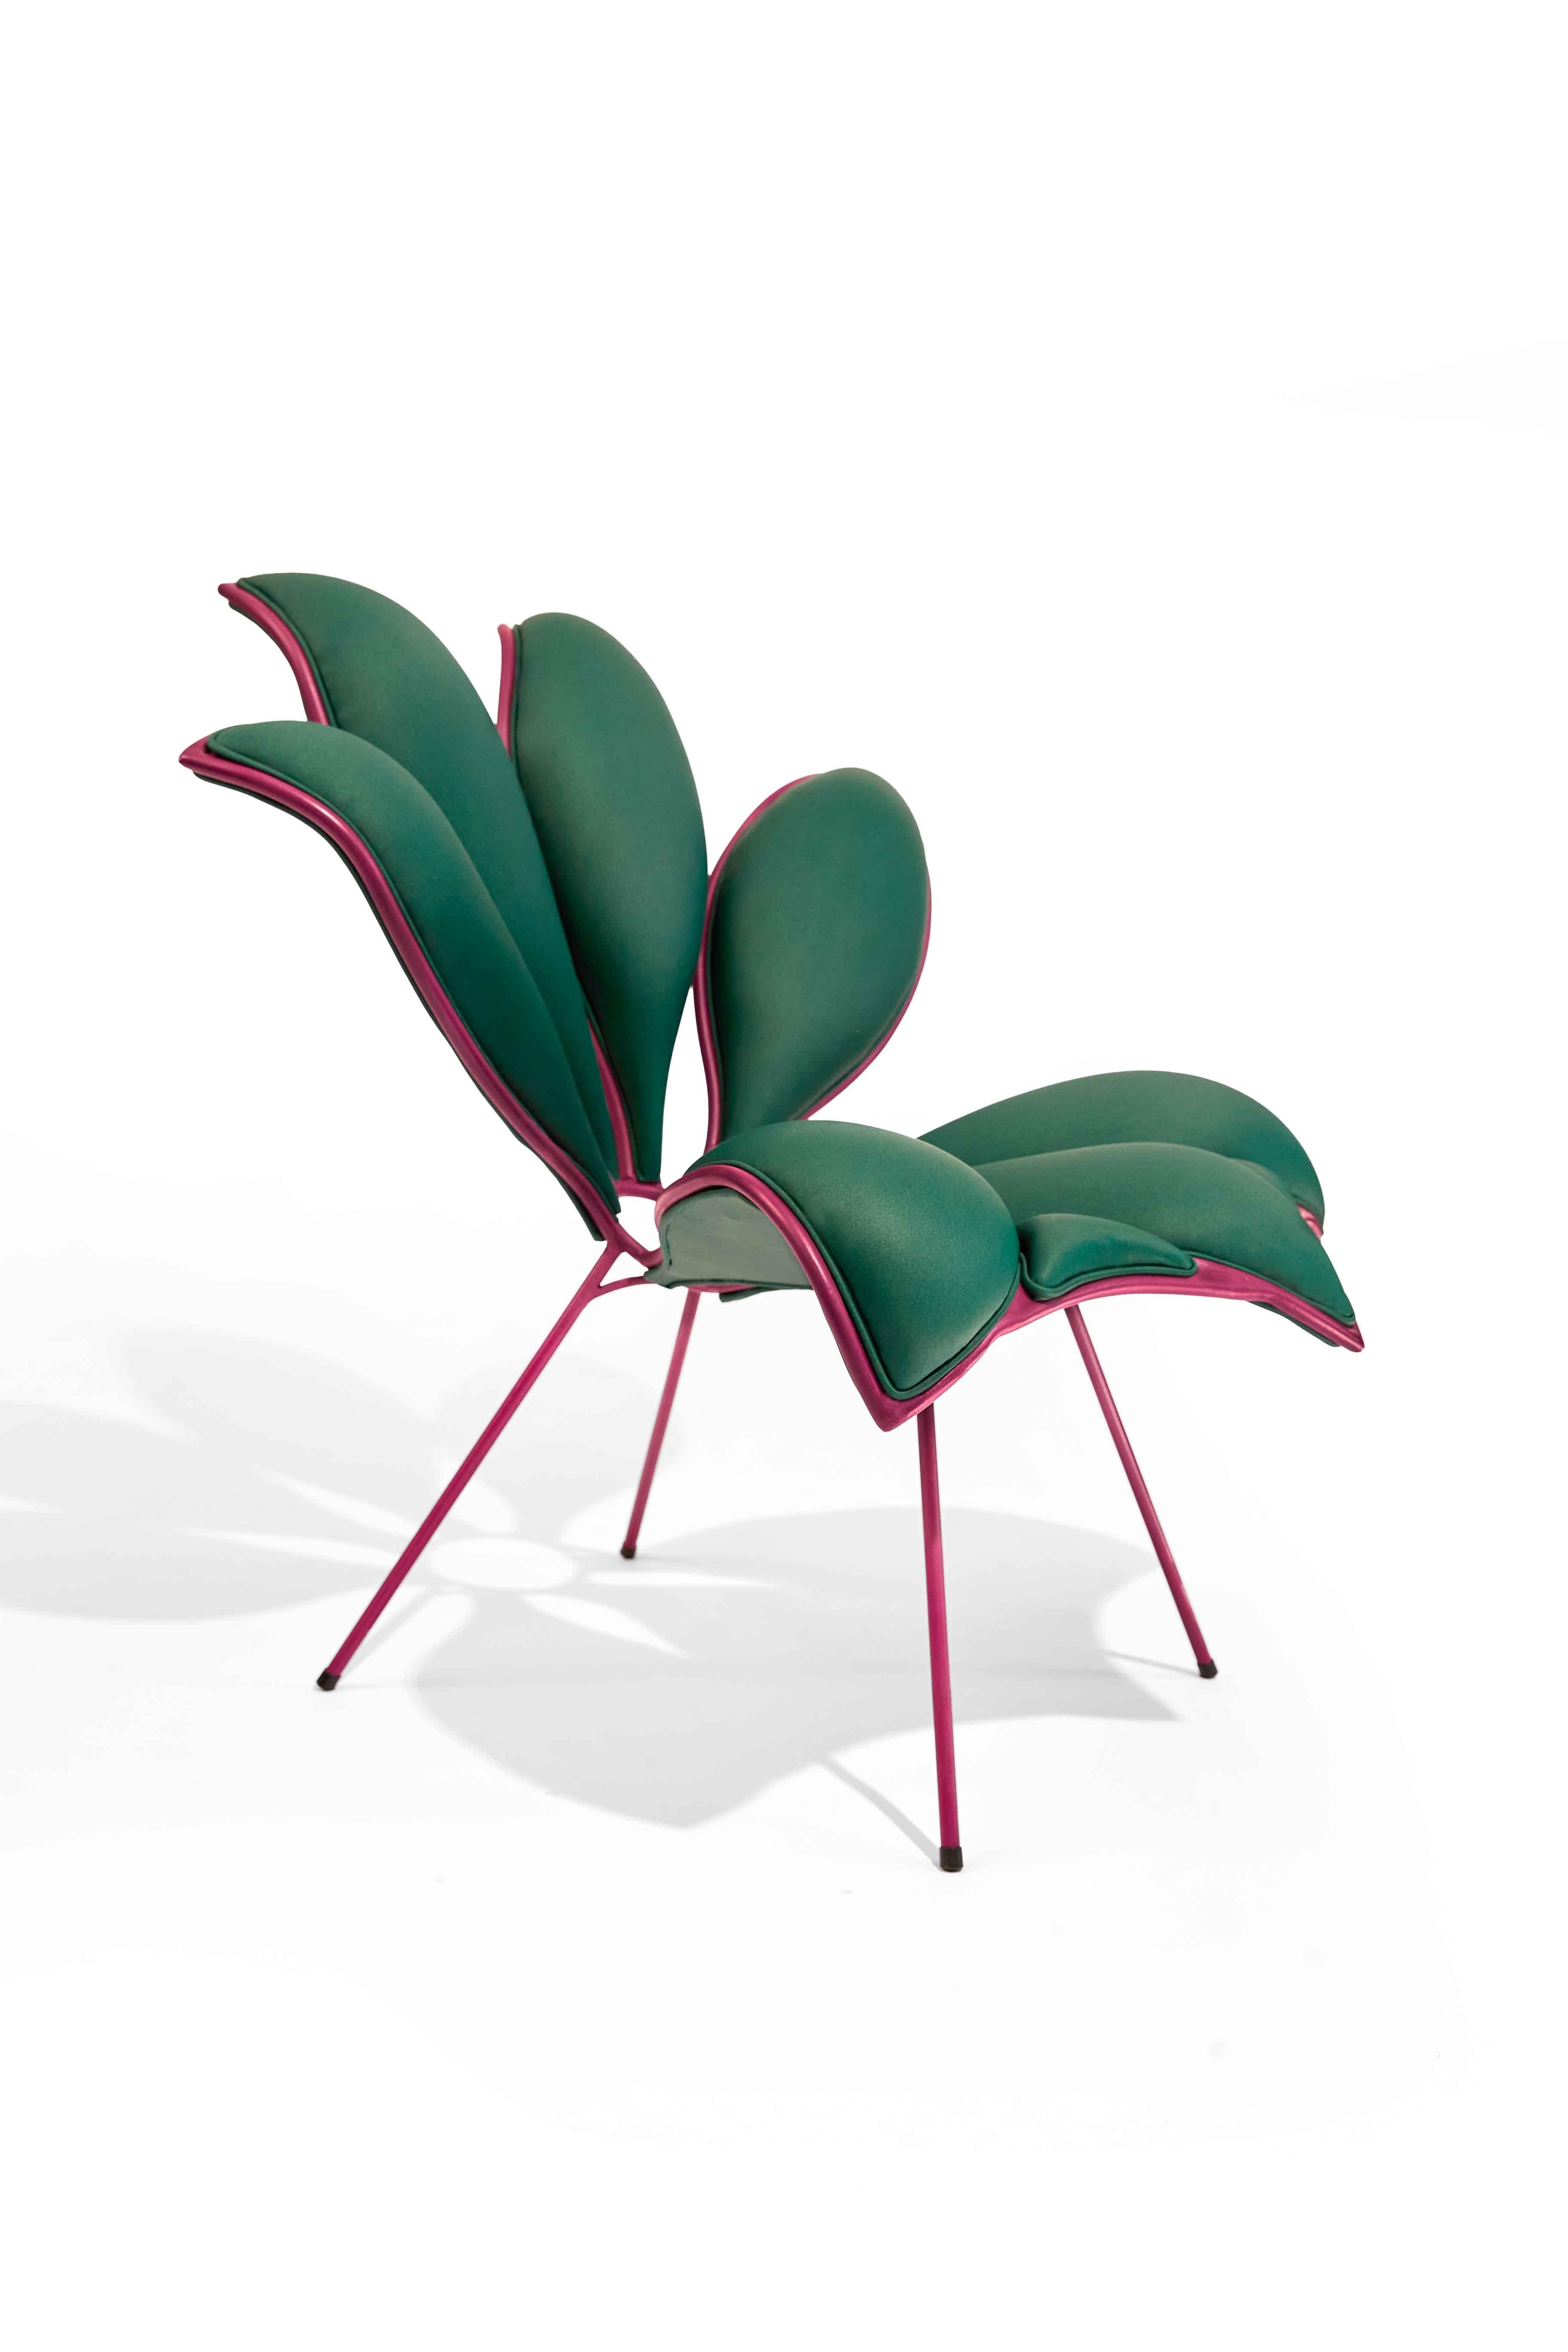 Portions of delicacy, poetry, sophistication and symbolism materialized in the design of the Flor de Lótus Armchair. The design that overflows transcendental narratives is born from the collaboration of Estúdio Sergio J. Matos with the iconic model